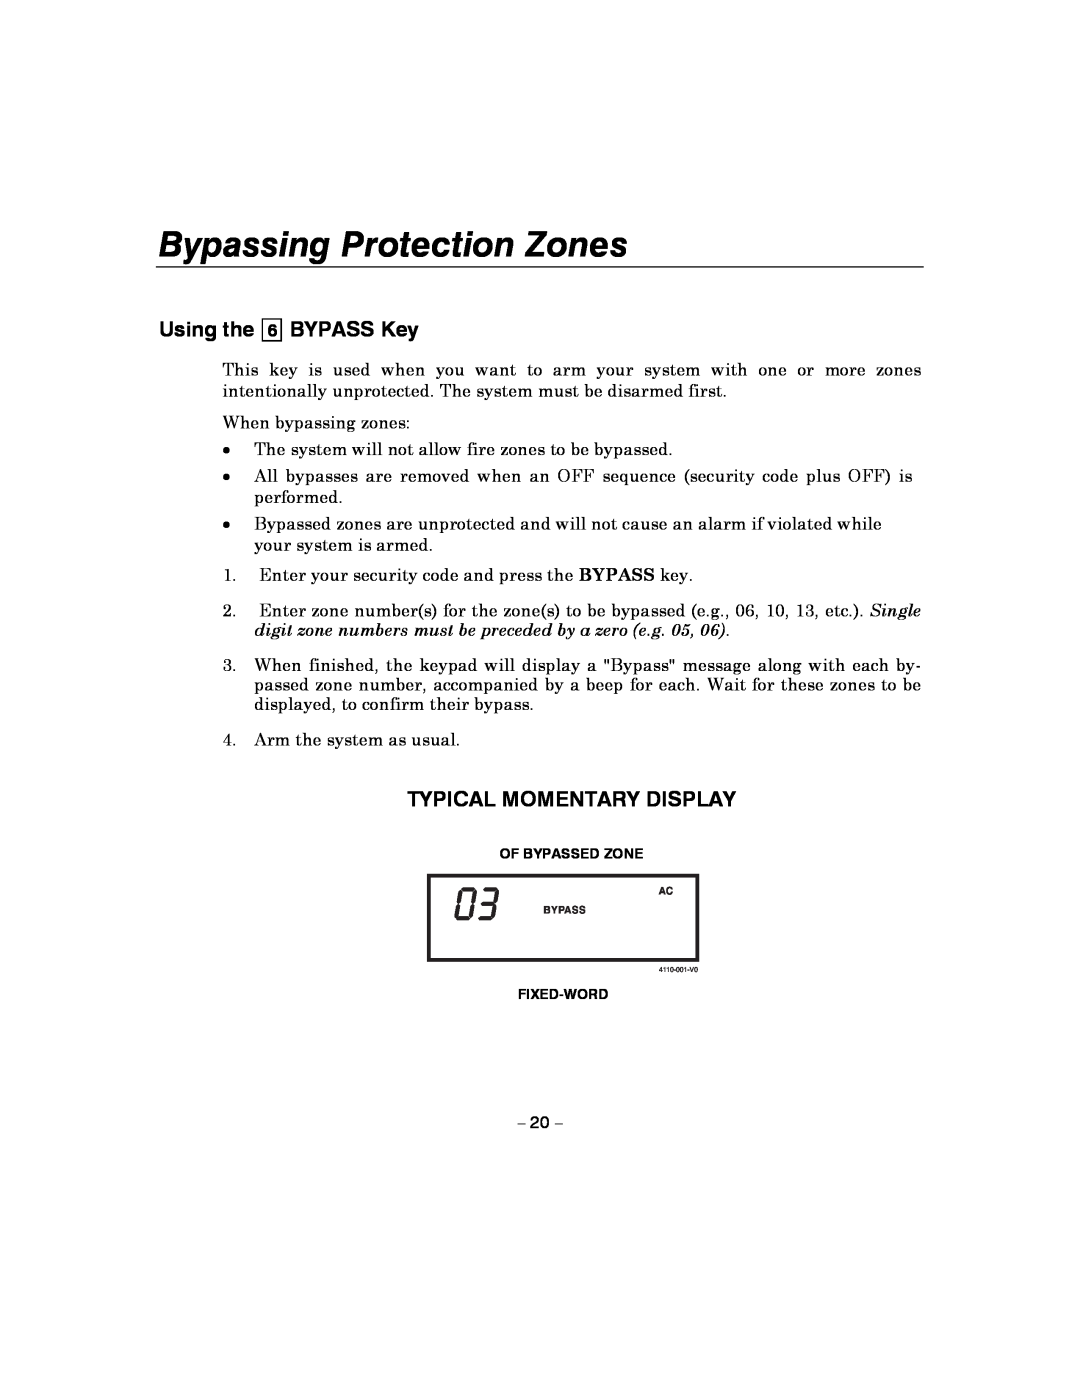 Honeywell 4110XM manual Bypassing Protection Zones, BYPASS Key, Typical Momentary Display, Using the 